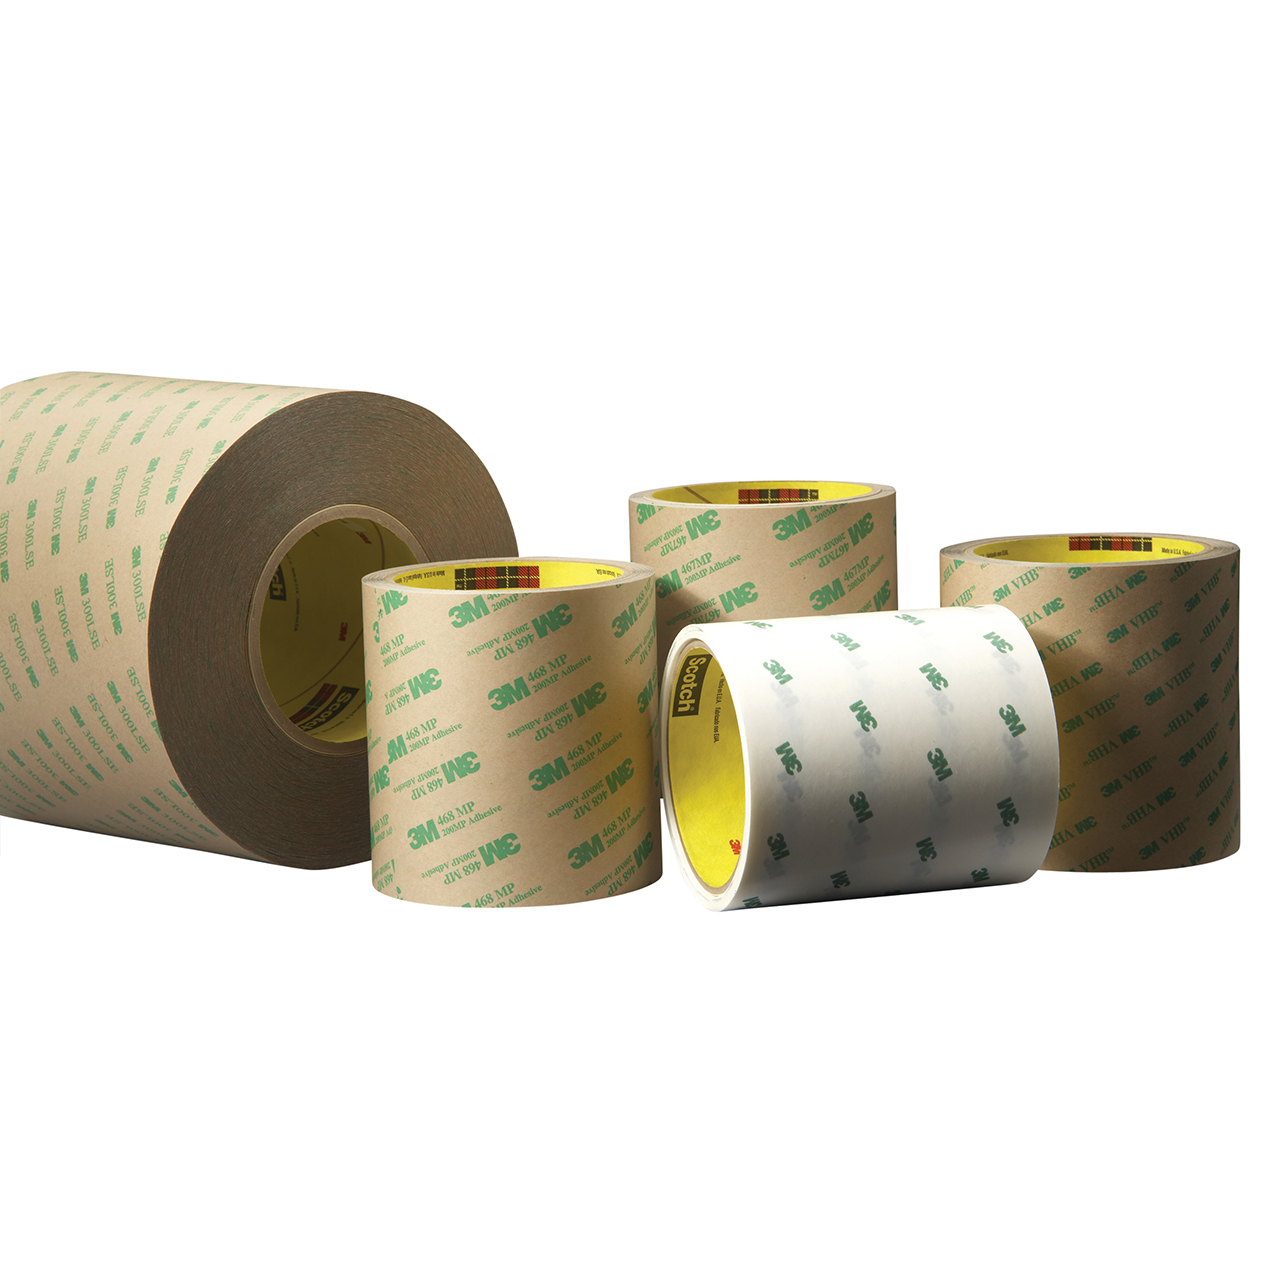 PET1A-Yellow | 1-mil Yellow Polyester (PET) Tape with Acrylic Adhesive